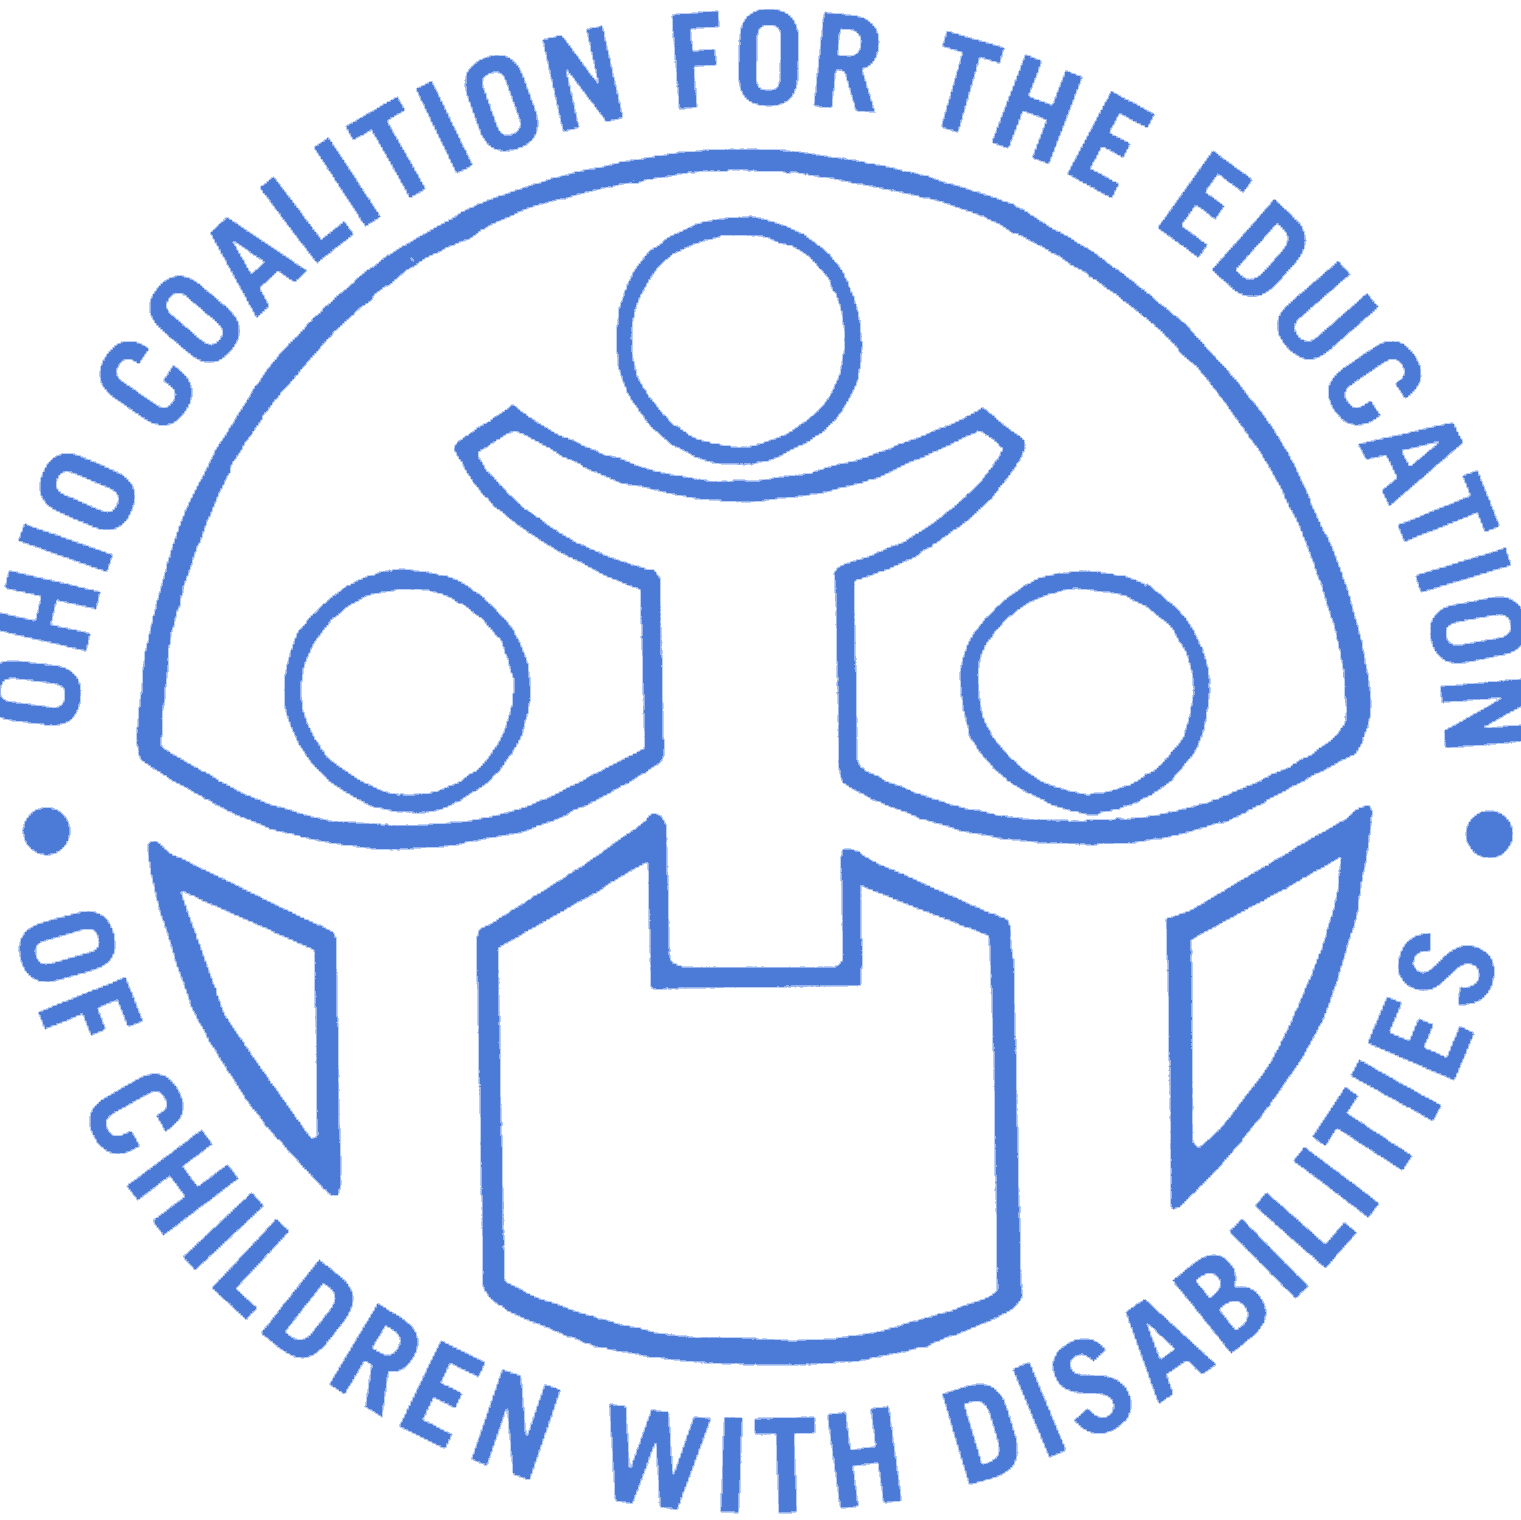 OCECD is a statewide nonprofit organization that serves families of infants, toddlers, toddlers, children and youth with disabilities in Ohio.